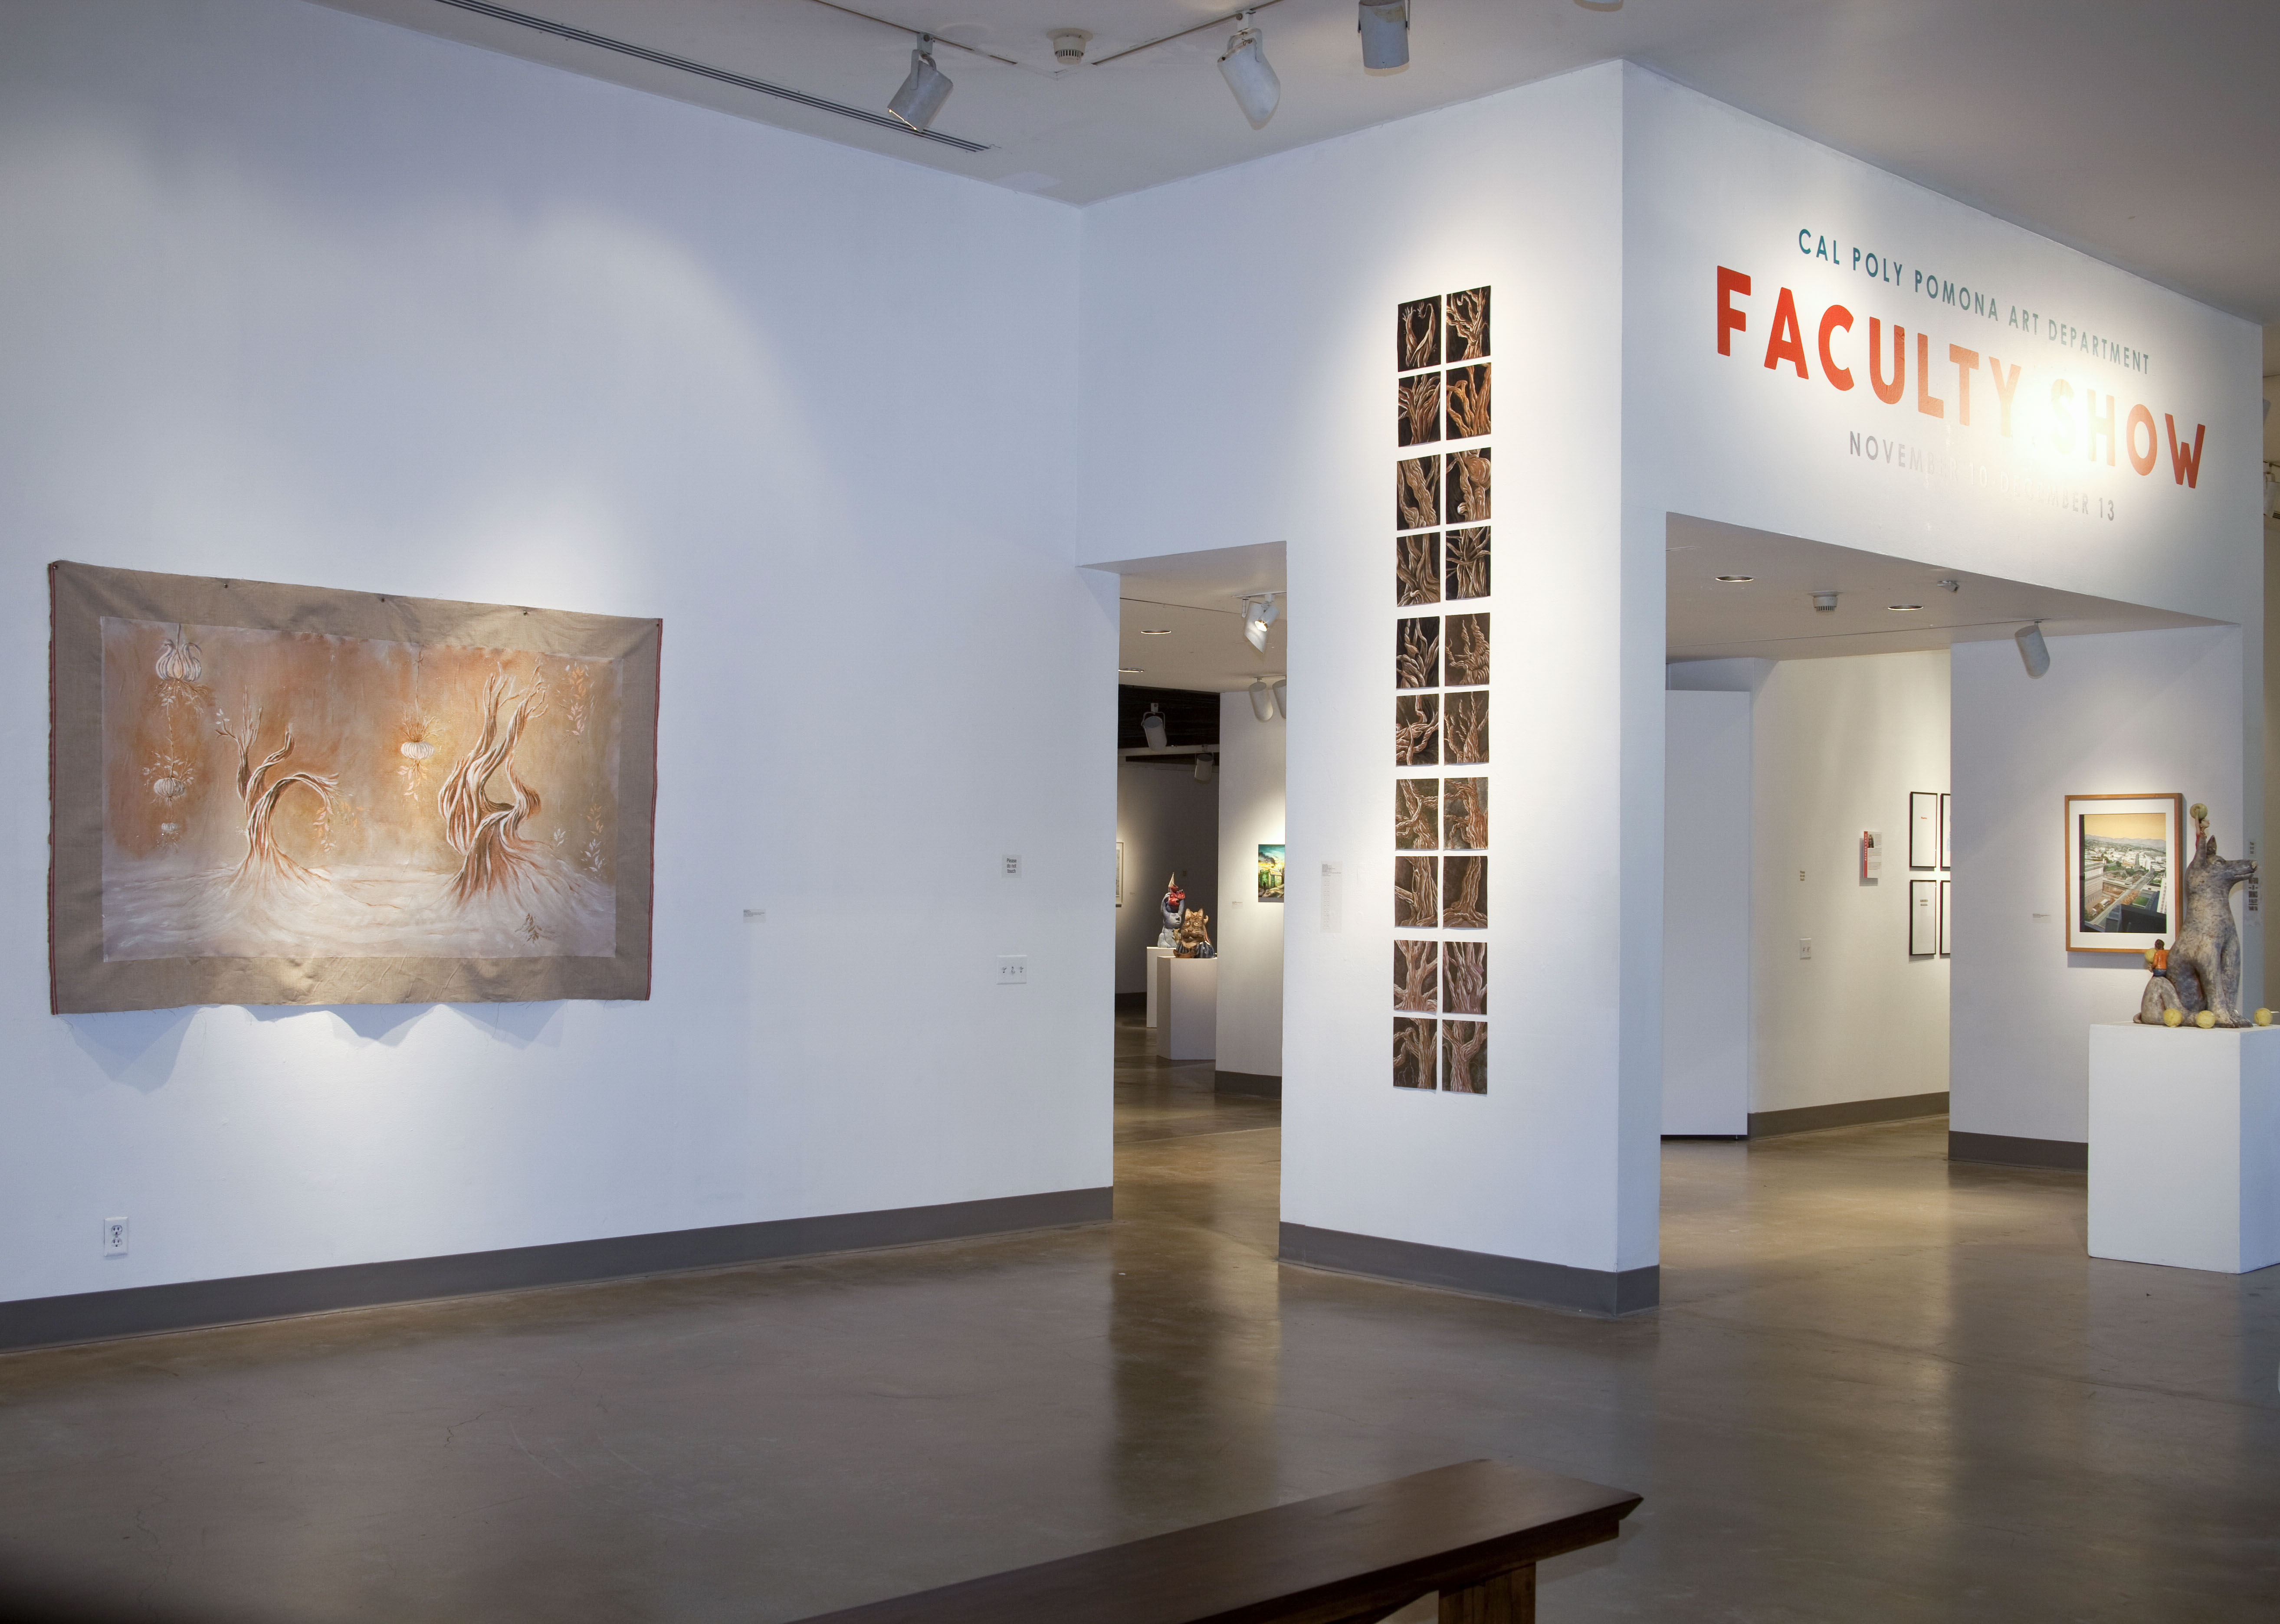 Installation View, Front East Gallery, Art Faculty Show 2014 Exhibition, Nov. 10, 2014 to Dec. 13, 2014.